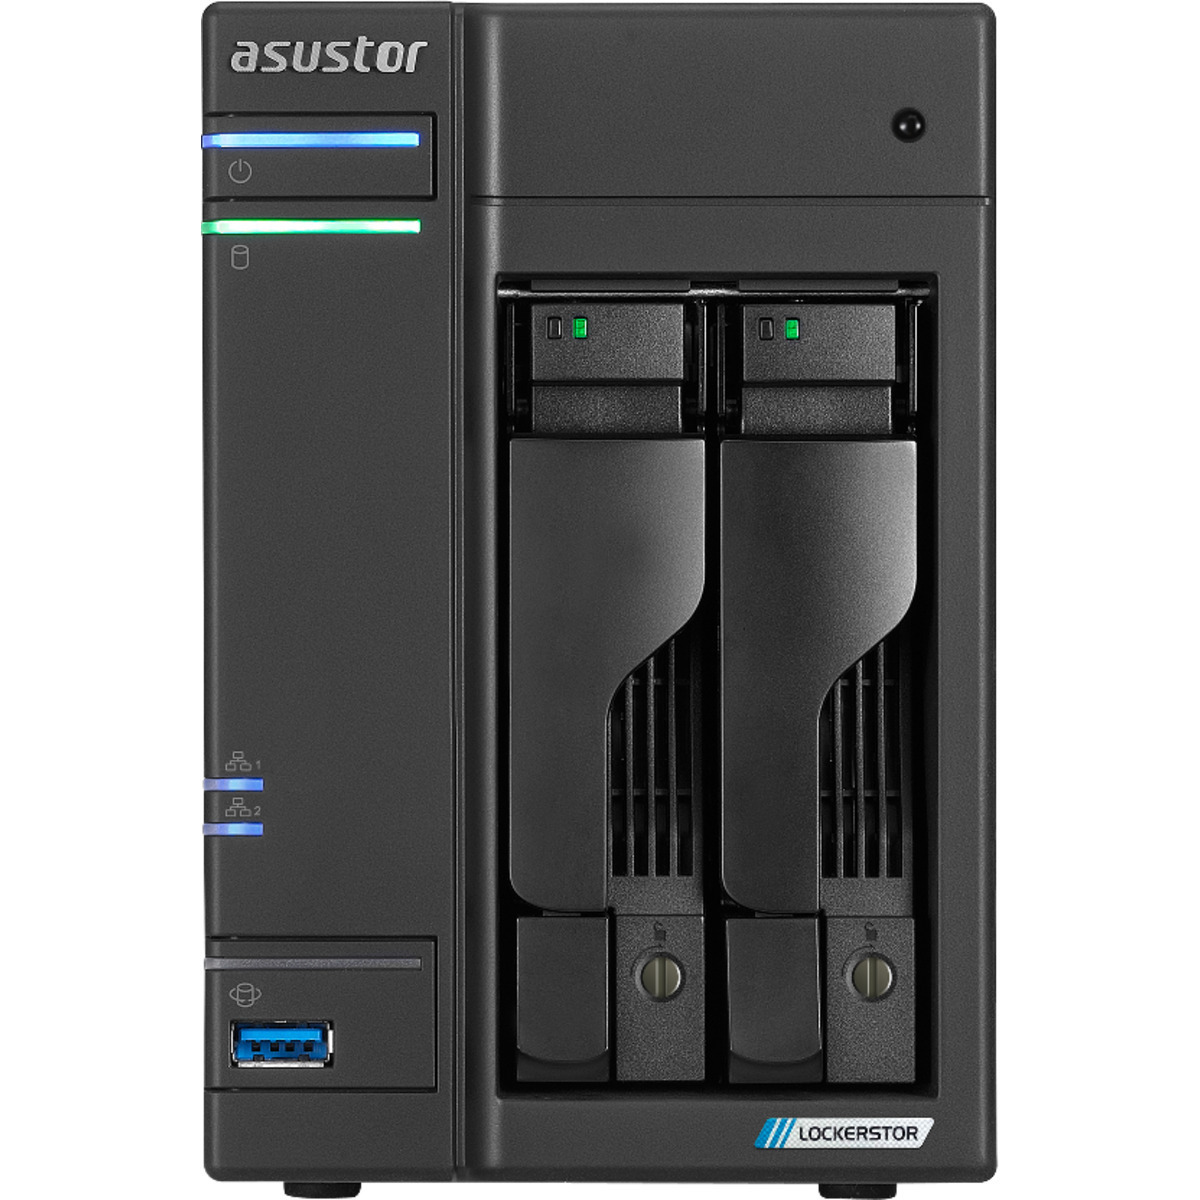 ASUSTOR LOCKERSTOR 2 Gen2 AS6702T 16tb 2-Bay Desktop Multimedia / Power User / Business NAS - Network Attached Storage Device 2x8tb Seagate IronWolf Pro ST8000NT001 3.5 7200rpm SATA 6Gb/s HDD NAS Class Drives Installed - Burn-In Tested - ON SALE - FREE RAM UPGRADE LOCKERSTOR 2 Gen2 AS6702T